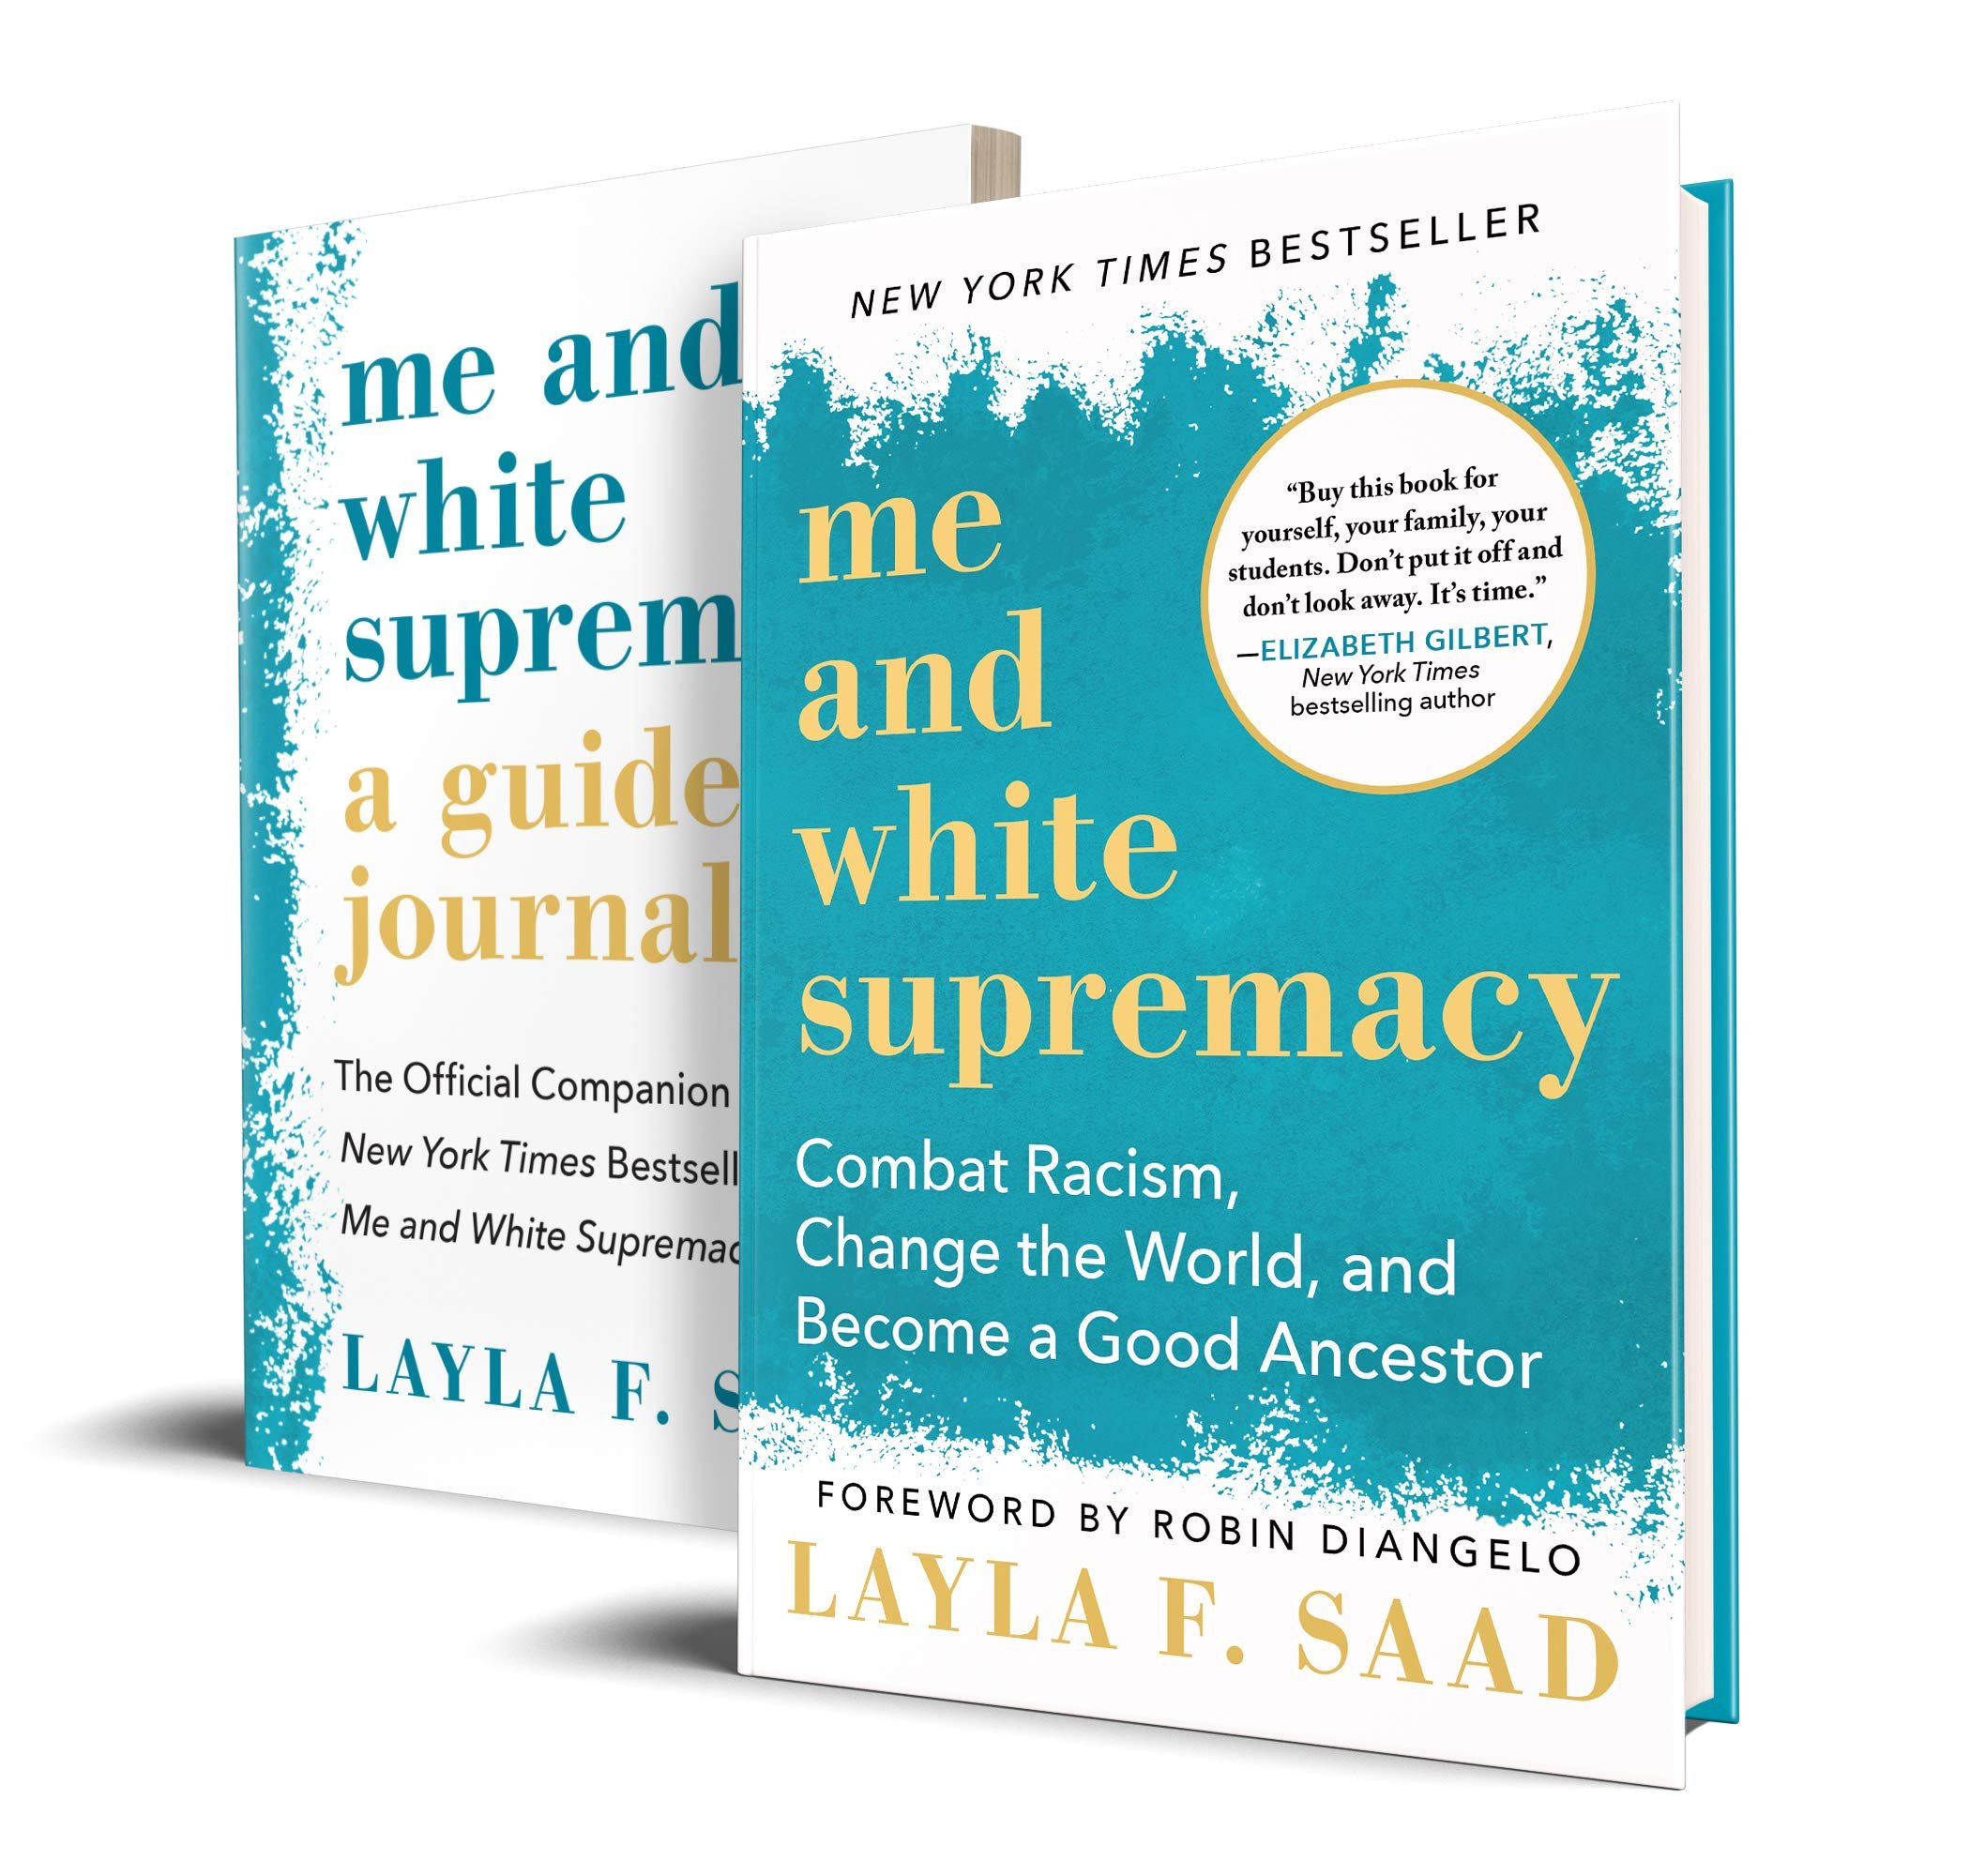 Me & White Supremacy and guided journal.jpg